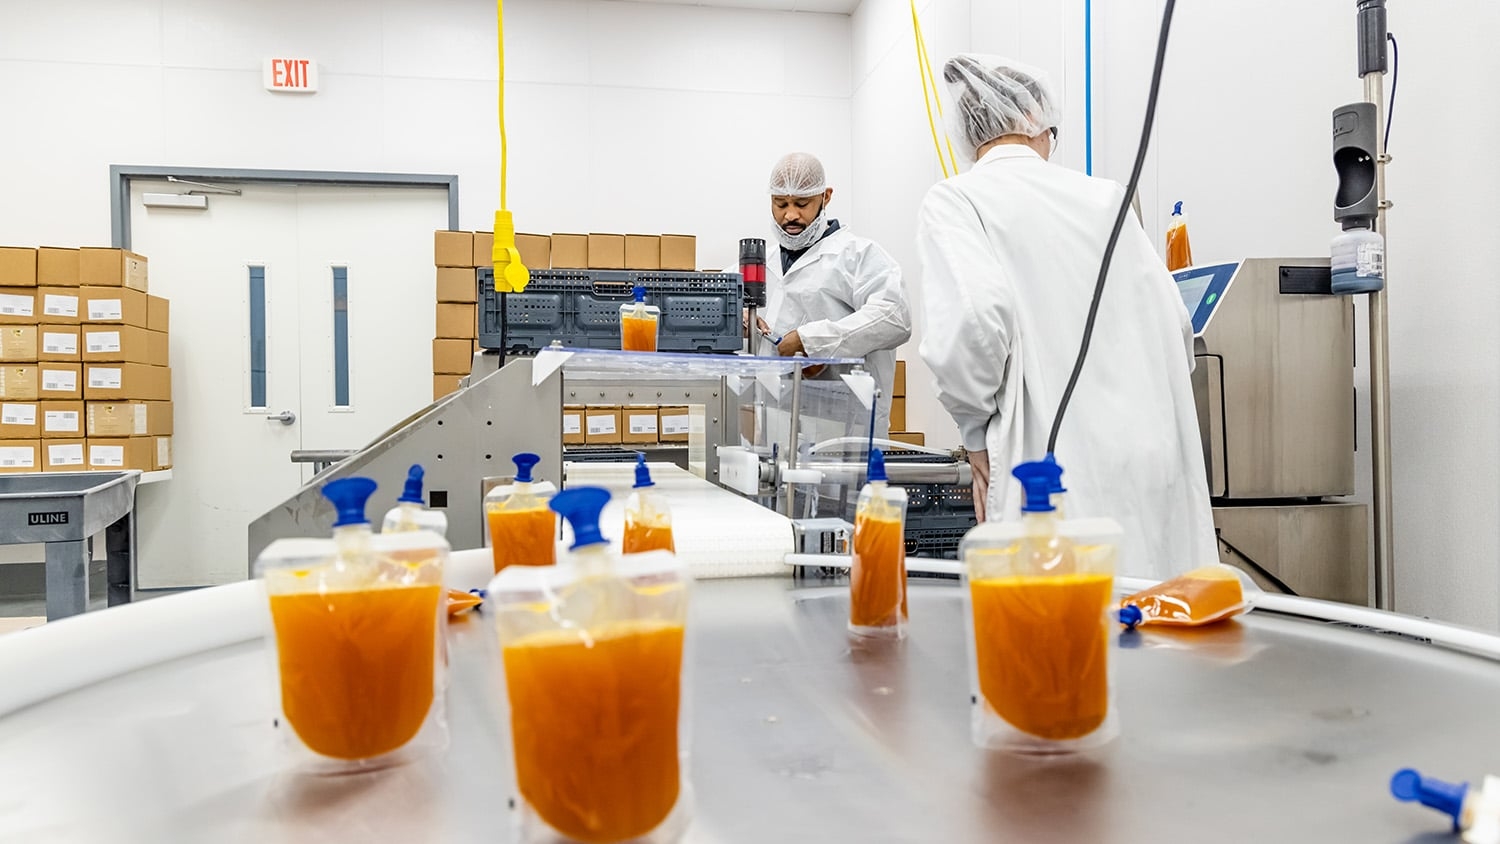 Two people in white lab coats and hair nets work at machinery. Packets of orange puree are in the foreground.